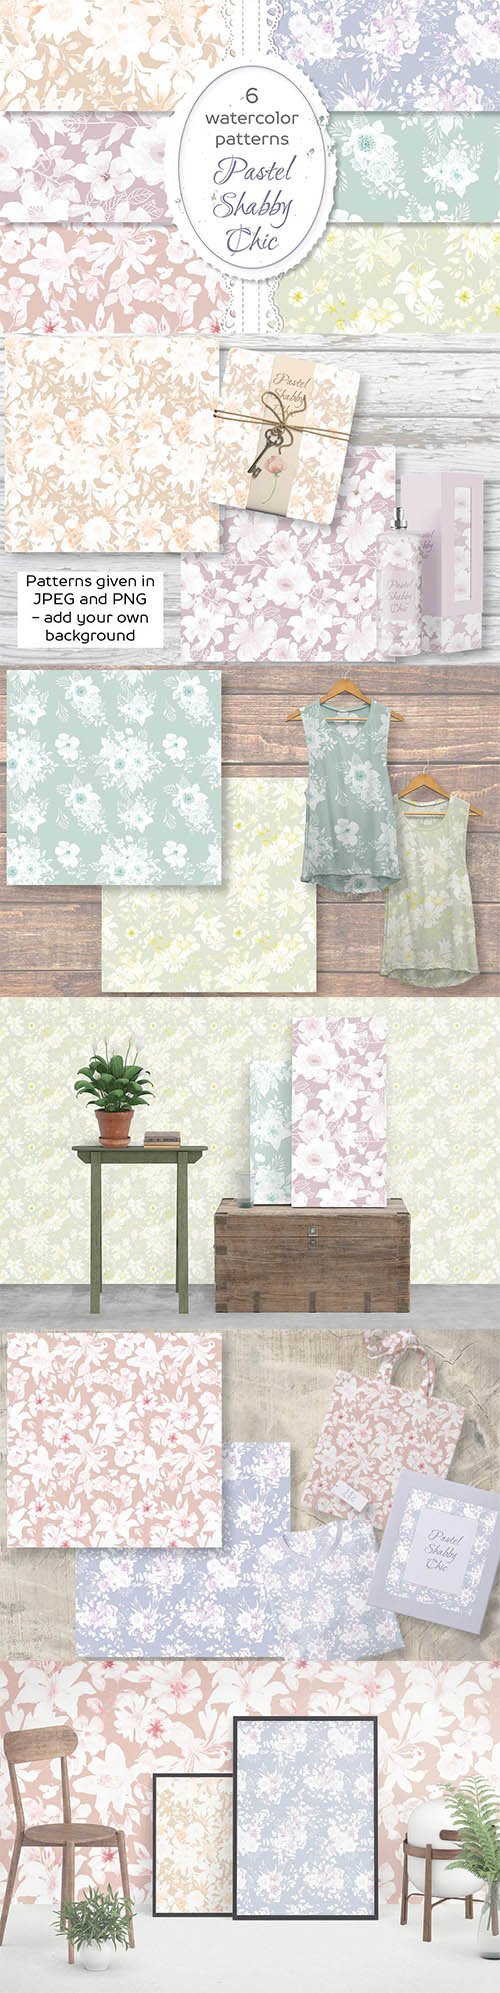 Shabby Chic Waterolor Floral Patterns